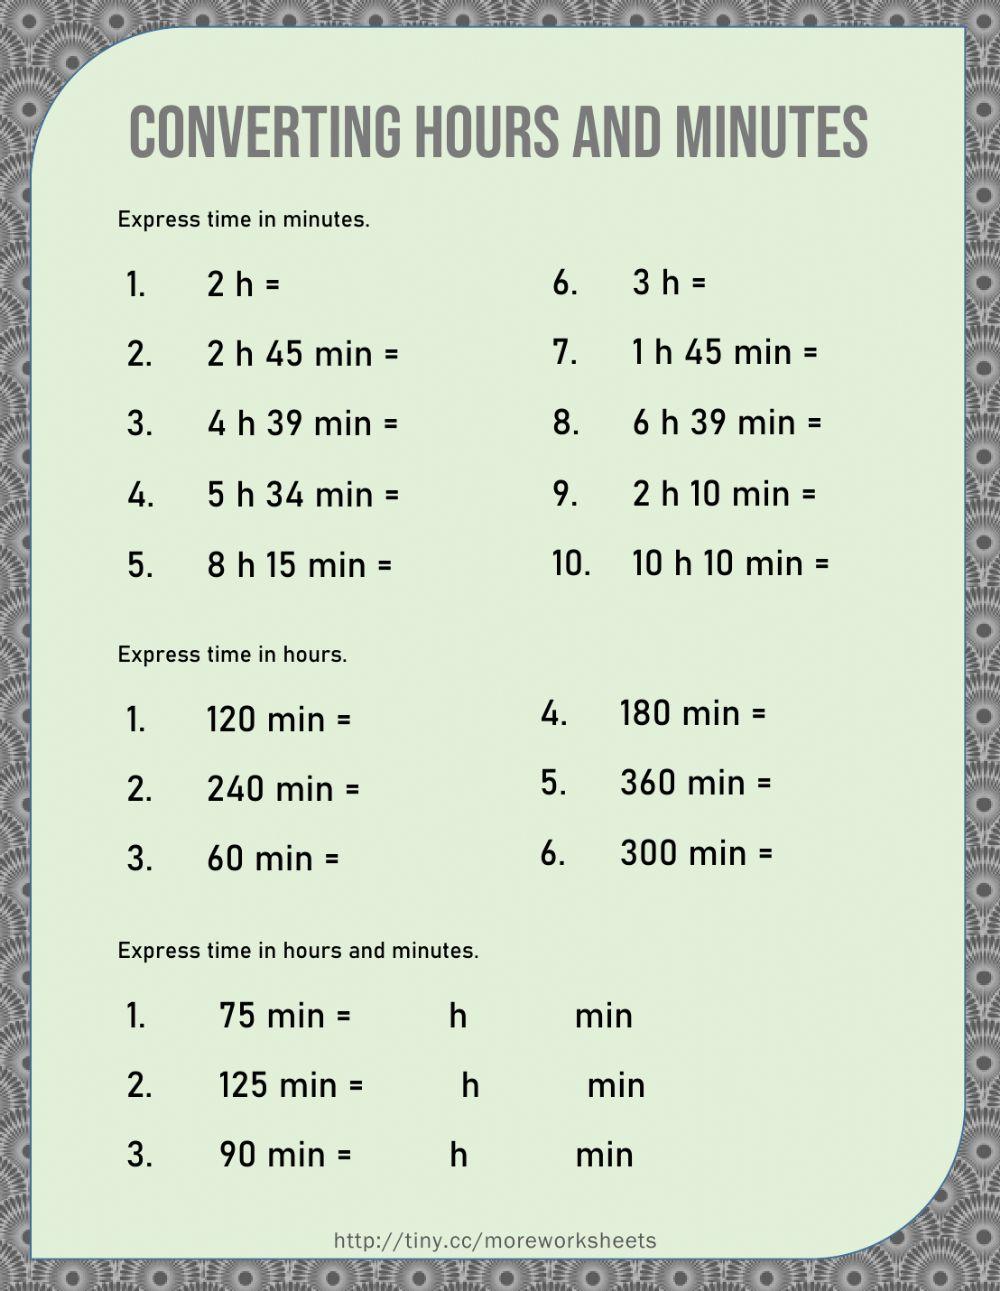 Converting Hours and Minutes